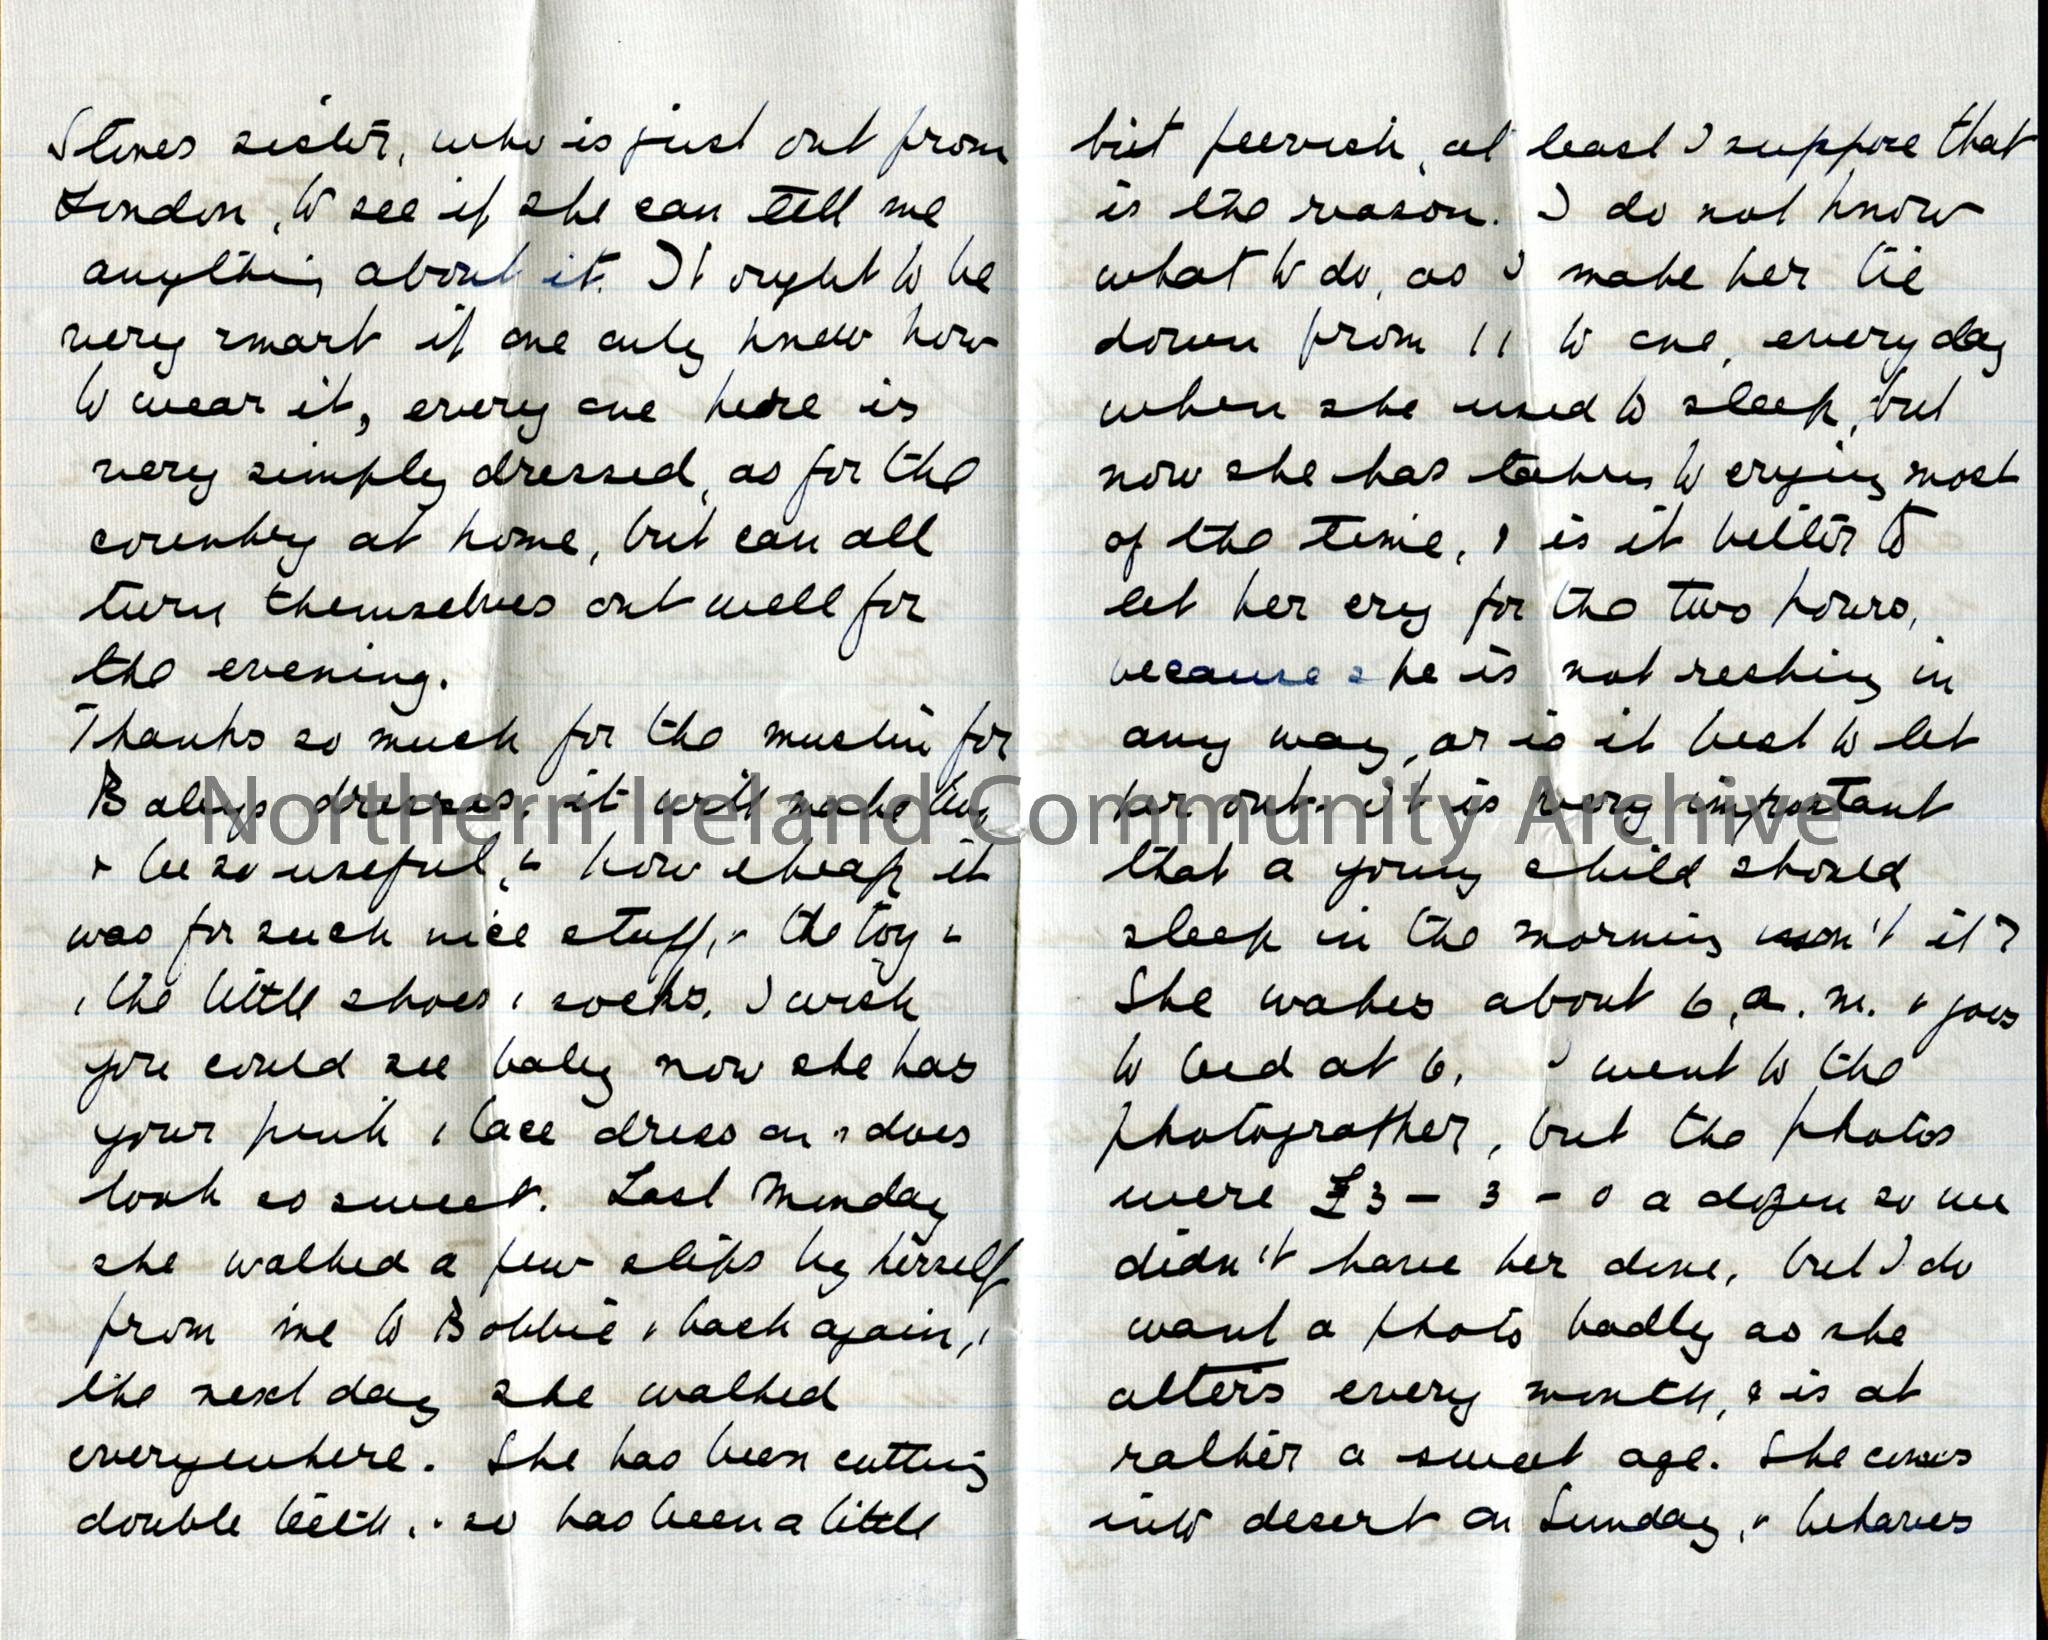 One of 3 double pages (1 white/lined, 2 blue/unlined) of handwritten letter from Dorothy to her mother. Her mother has sent a feather but she is unsur… – img084b